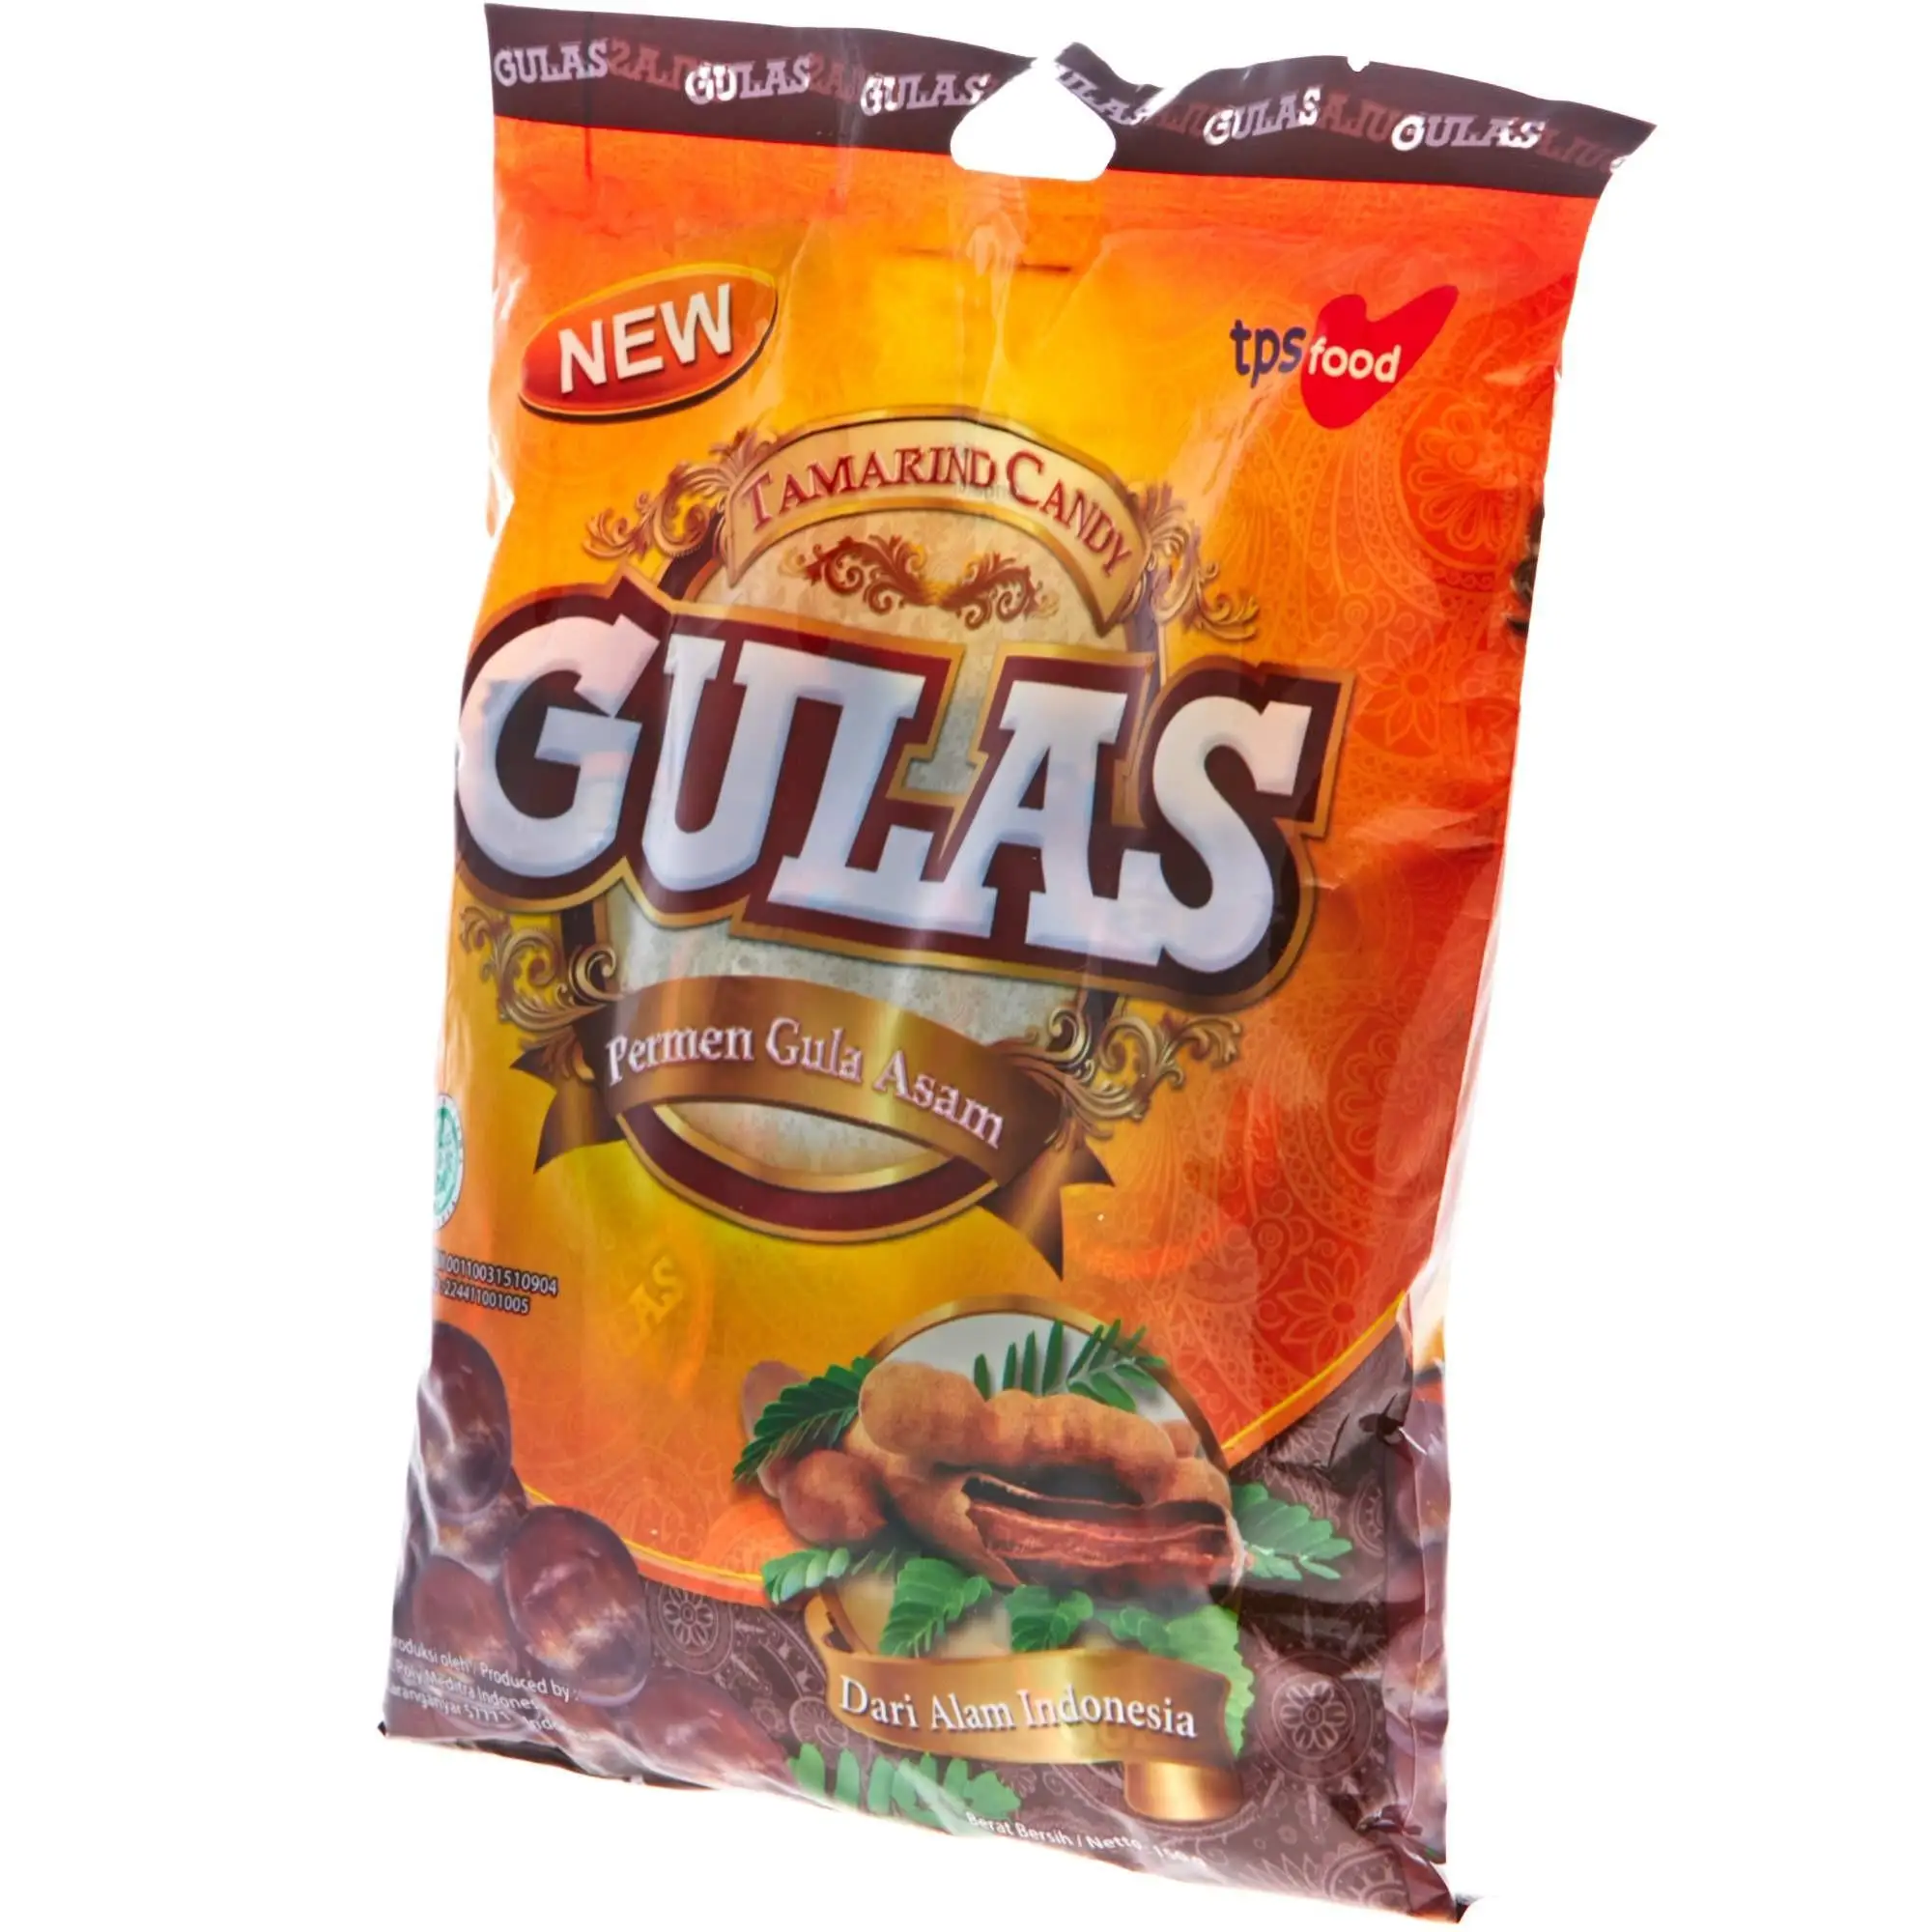 Gulas Tamarind Candy Indonesia Origin Cheap Popular Candy With Sweet Sour Flavour Buy Cheap Popular Candy Indonesia Product On Alibaba Com